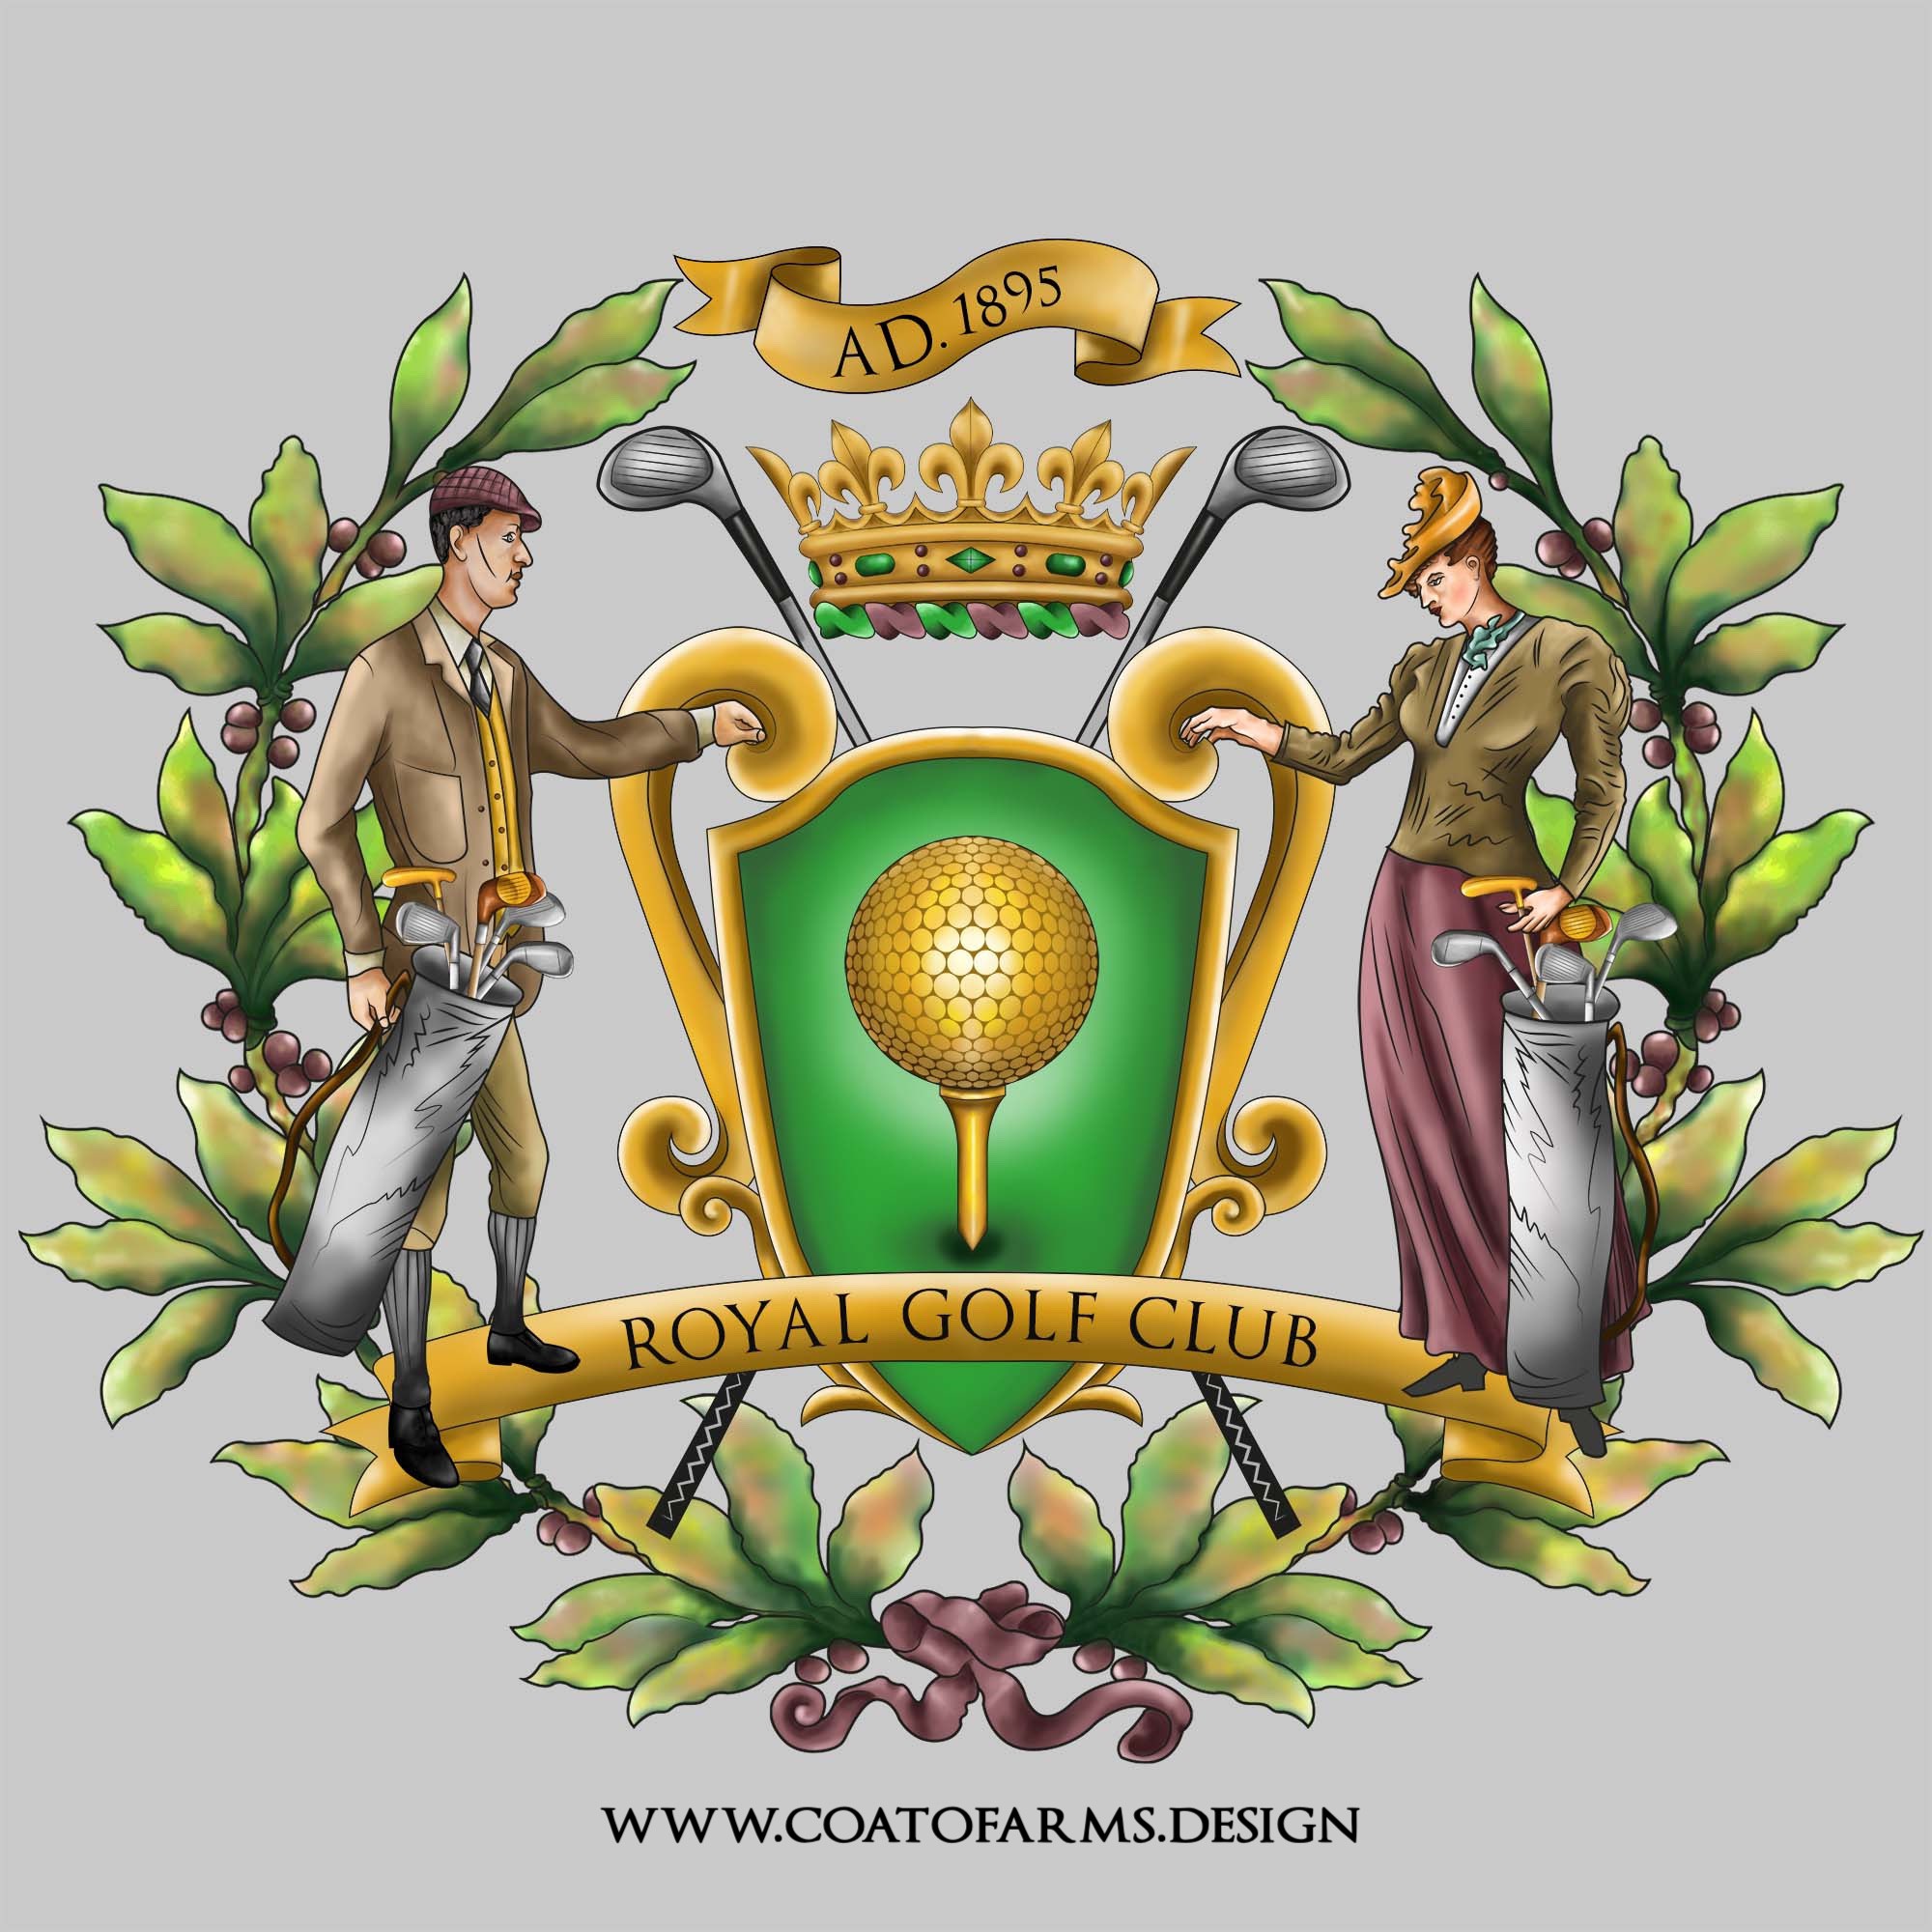 Business logo coat of arms for a Royal Golf Club from the USA Heraldry logo. In this heraldry logo we can see a golf ball in a main centre of the shield in form of a winning cup, on both sides we can see a woman and a man dressed as golfers in nineteenth-century costumes. Just behind the shield there are crossed golf clubs. Above the shield there is a crown and above the crown a sign with a date 1895. Below the shield a scroll with a title Royal Golf Club